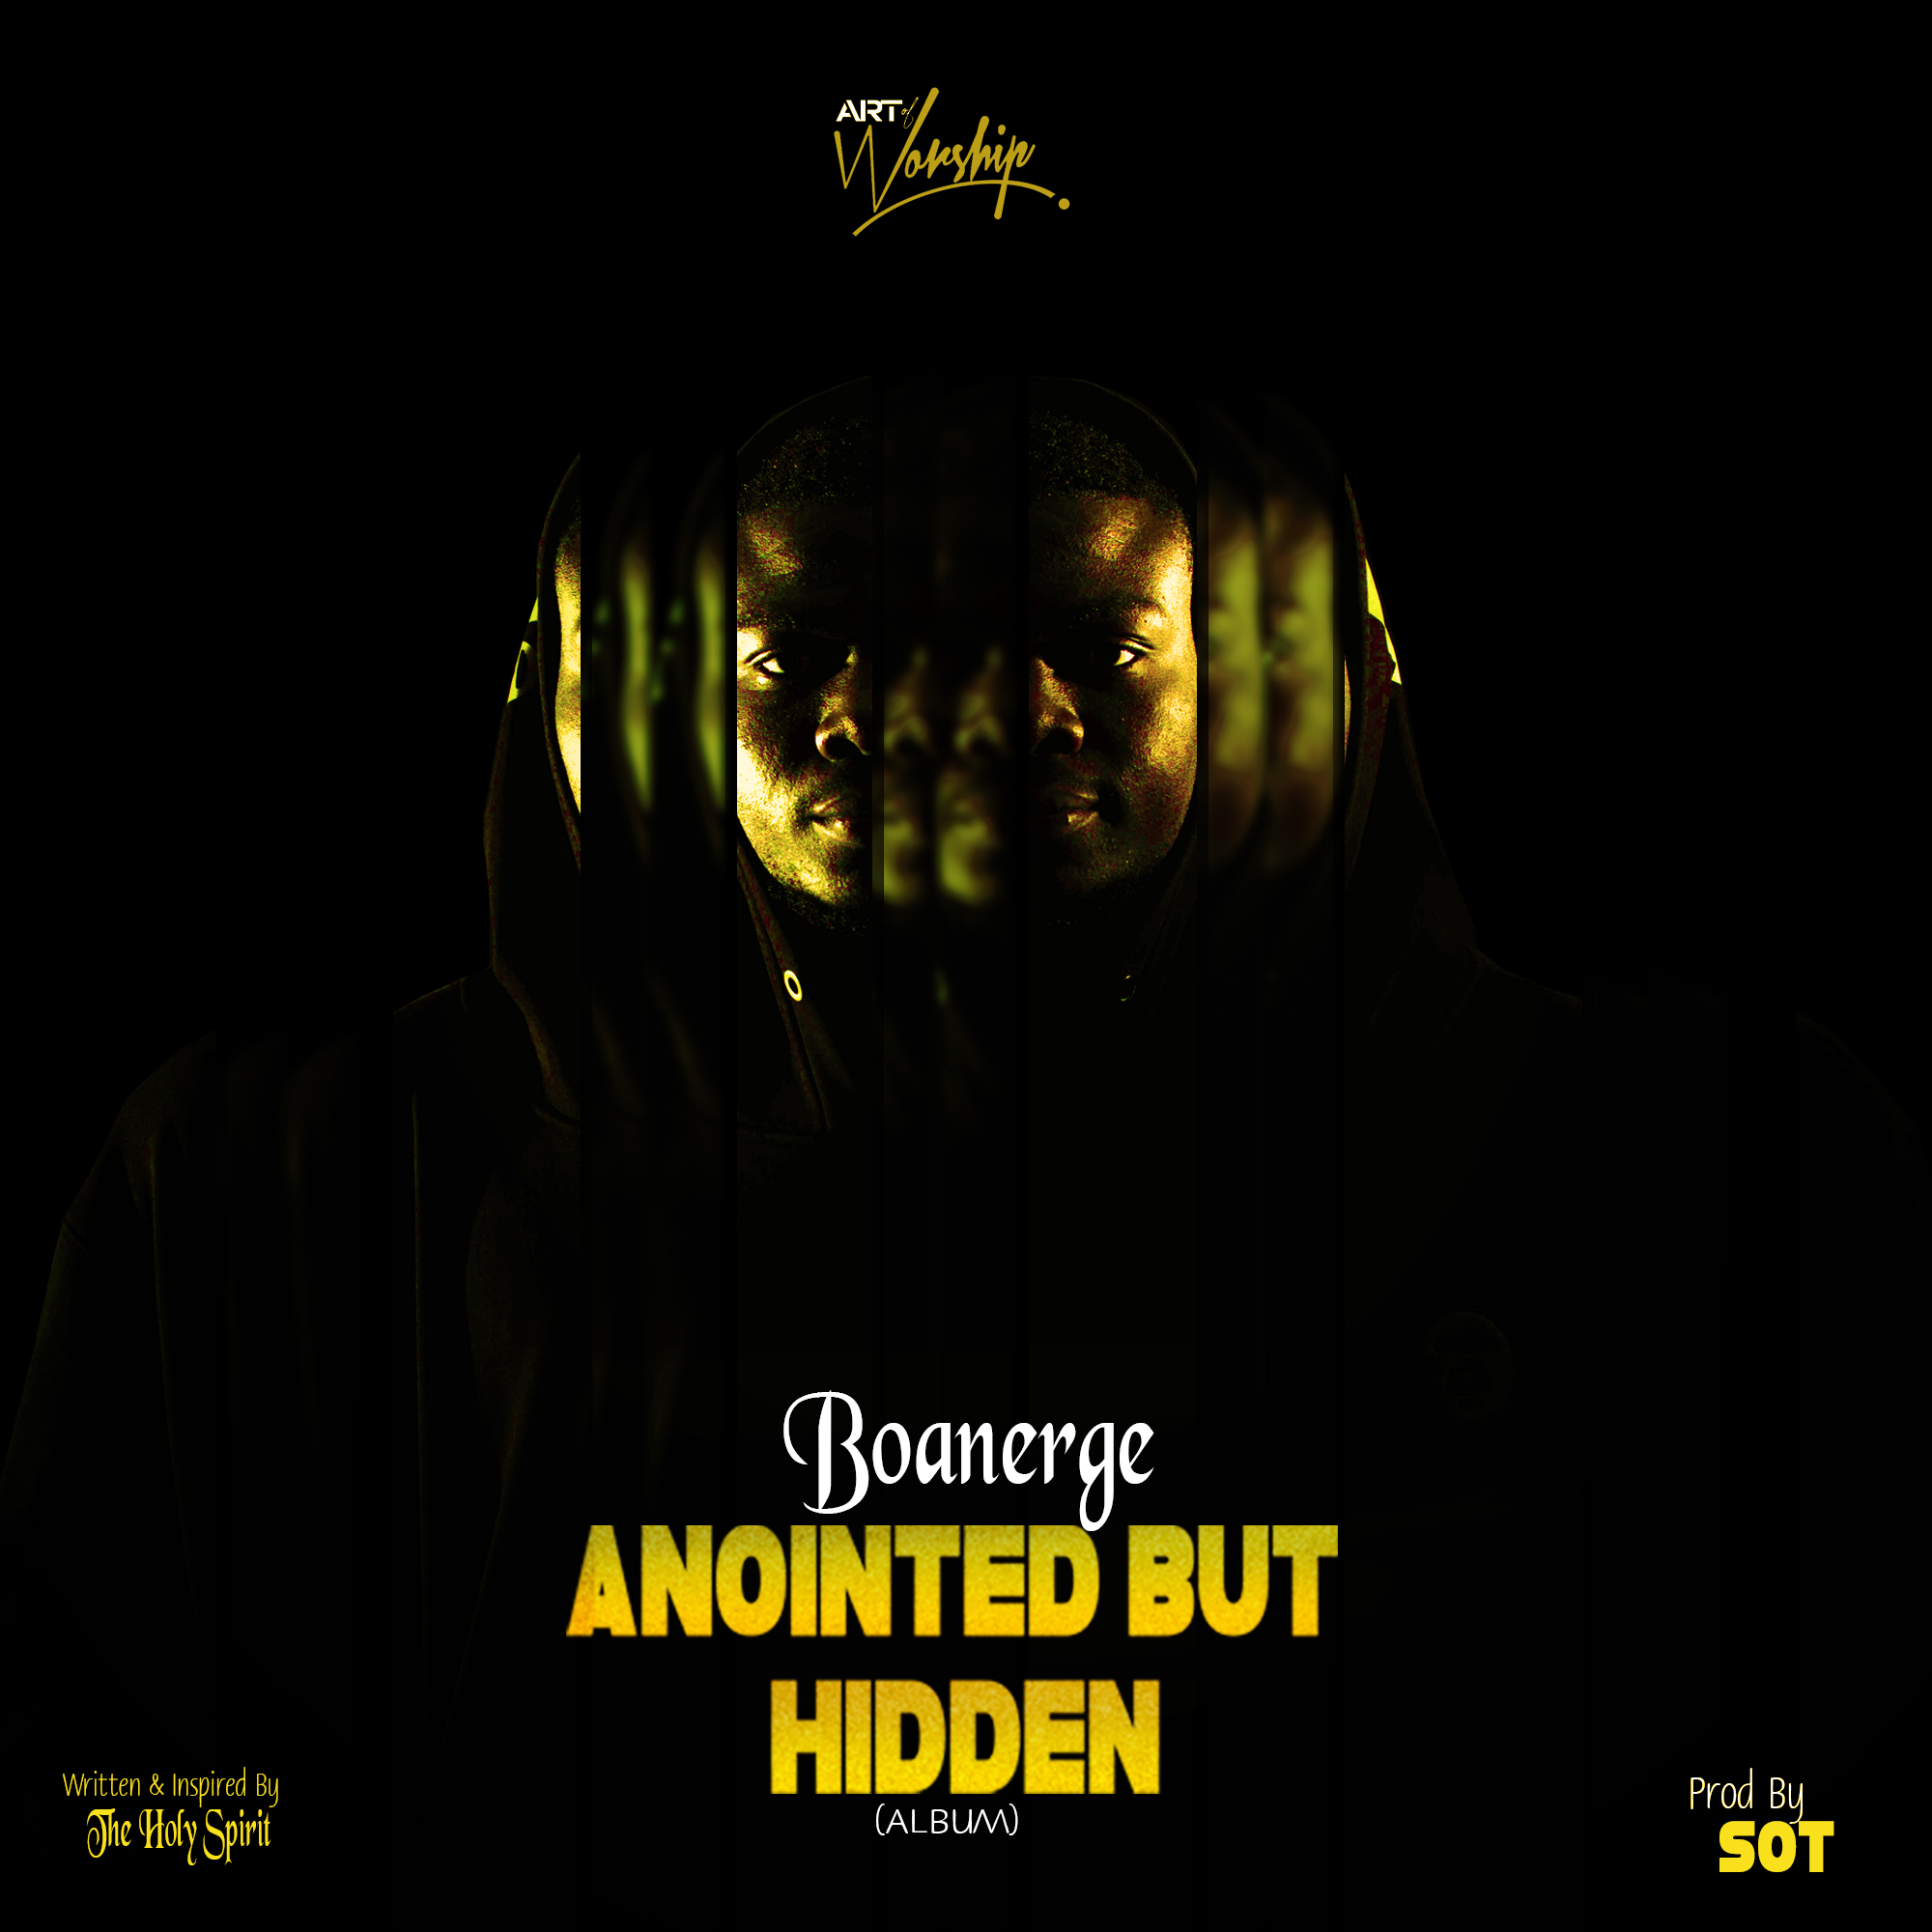 Boanerge-Anointed But Hidden(Album) Part 2